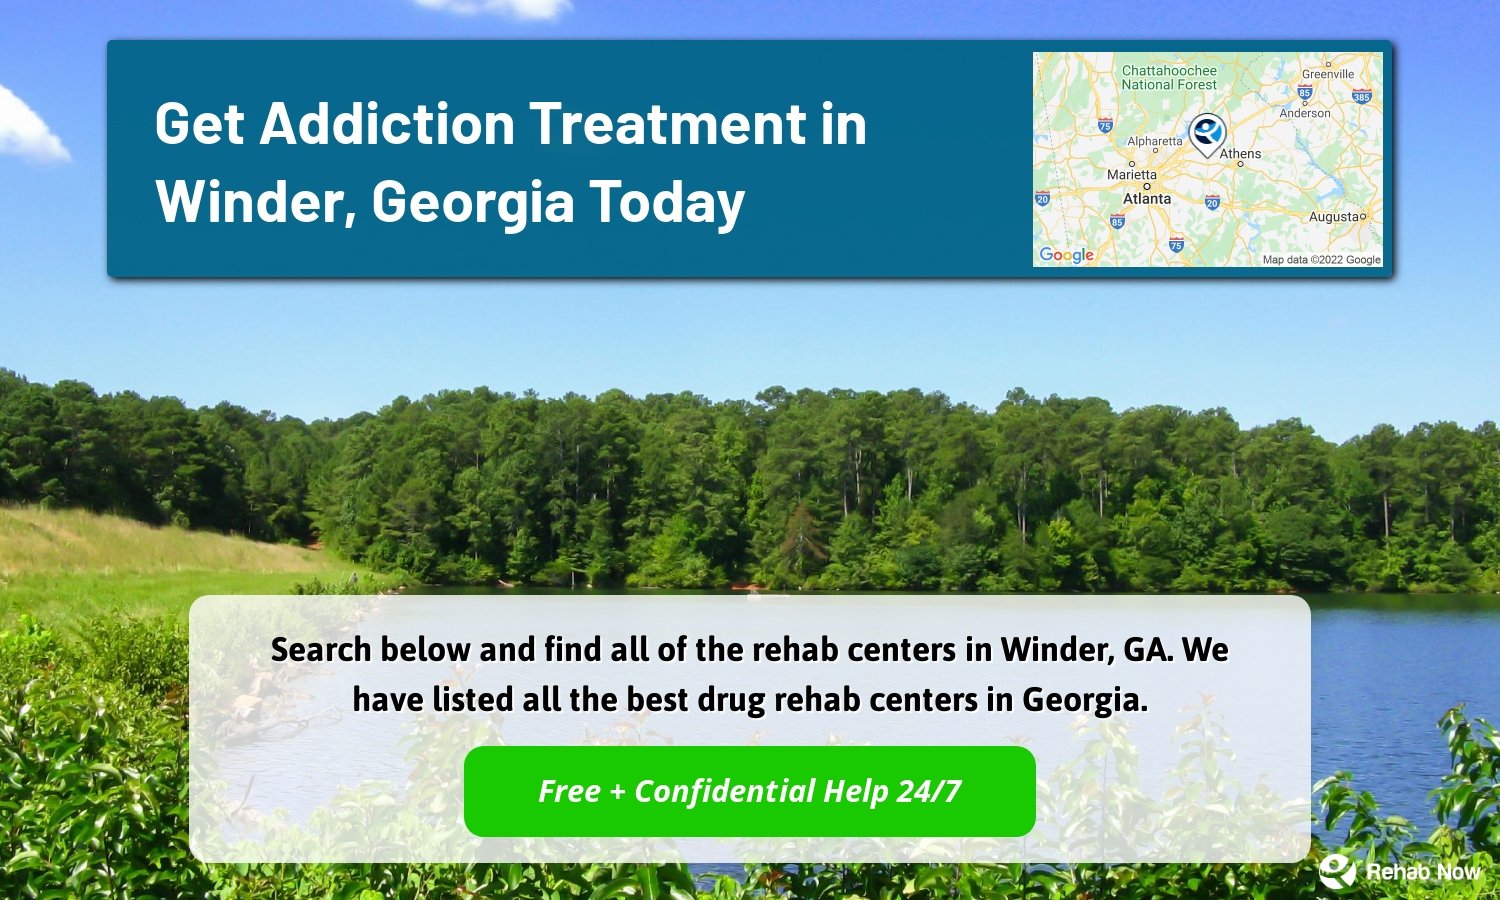 Search below and find all of the rehab centers in Winder, GA. We have listed all the best drug rehab centers in Georgia.